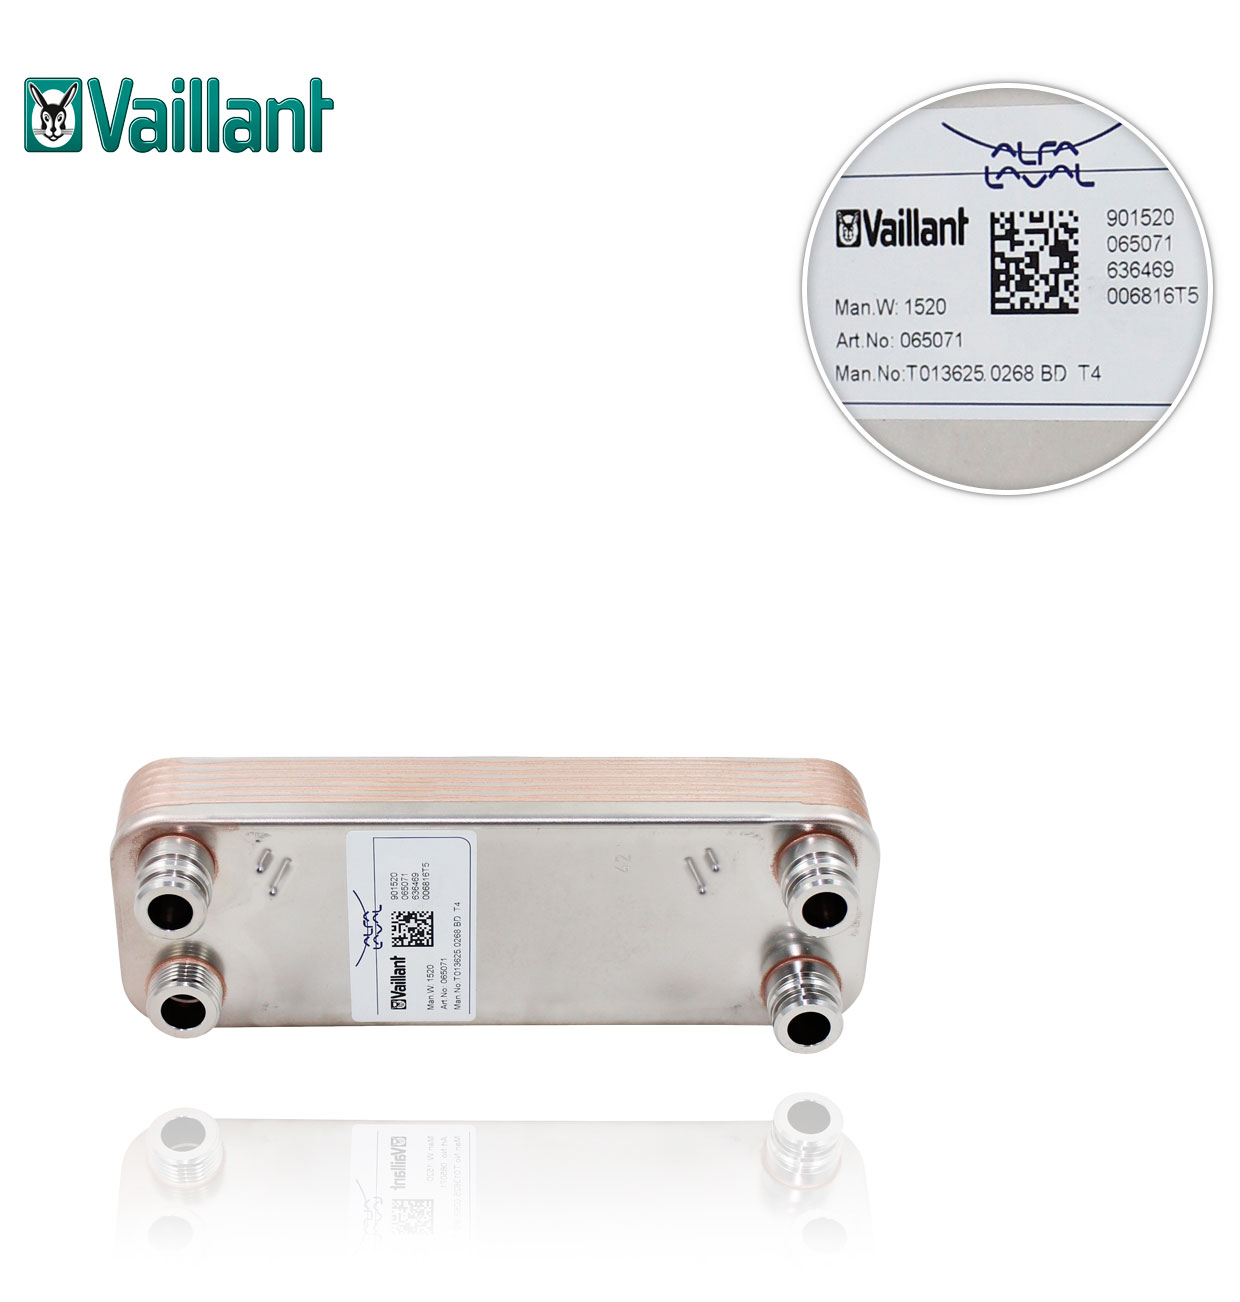 VAILLANT 0020073794 12 PLATE EXCHANGER